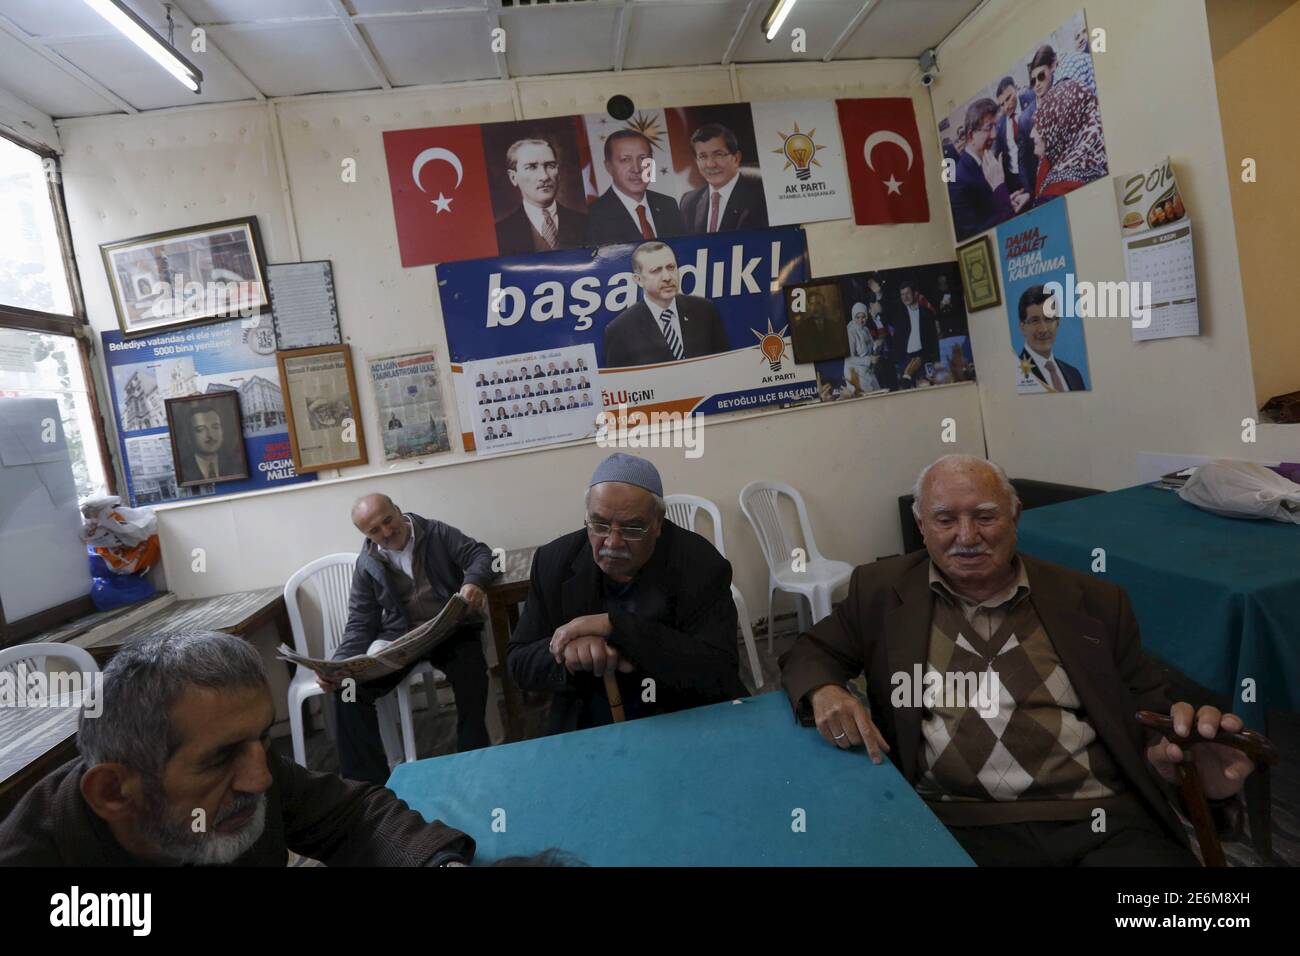 Men chat at a local election campaign office of the ruling AK Party in Istanbul, Turkey, October 30, 2015. Turkey holds its second general election of the year on Nov. 1, a snap vote which President Tayyip Erdogan hopes will see the ruling AK Party win back the majority it lost five months ago. In the background (L-R) posters of Turkey's founding leader Ataturk, President Tayyip Erdogan and Prime Minister Ahmet Davutoglu are seen. REUTERS/Murad Sezer Stock Photo